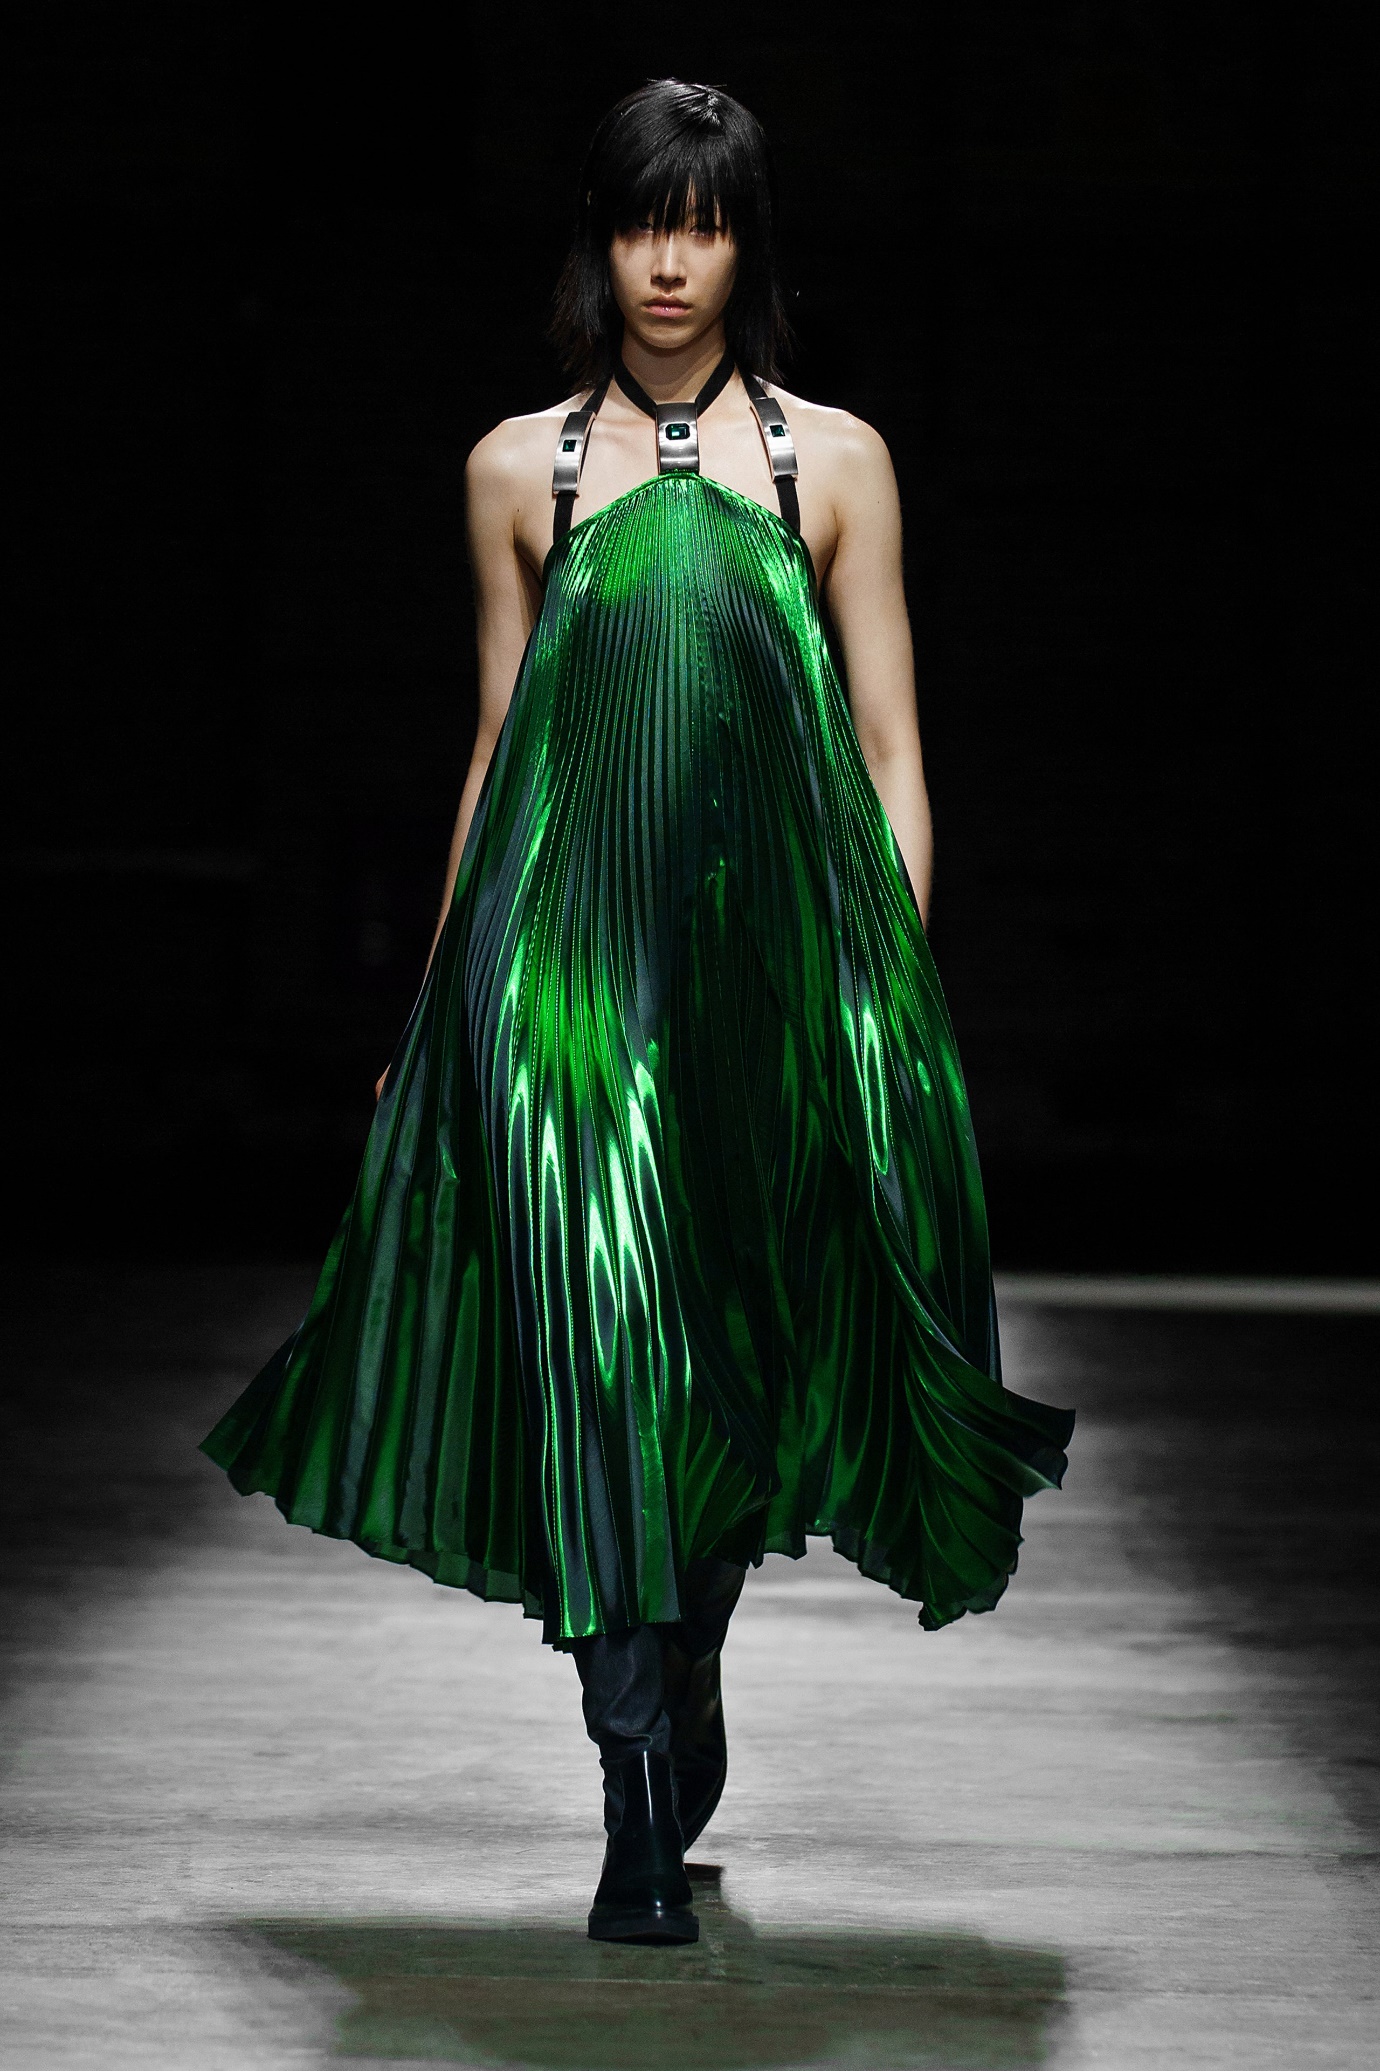 A person wearing a green dress Description automatically generated with medium confidence